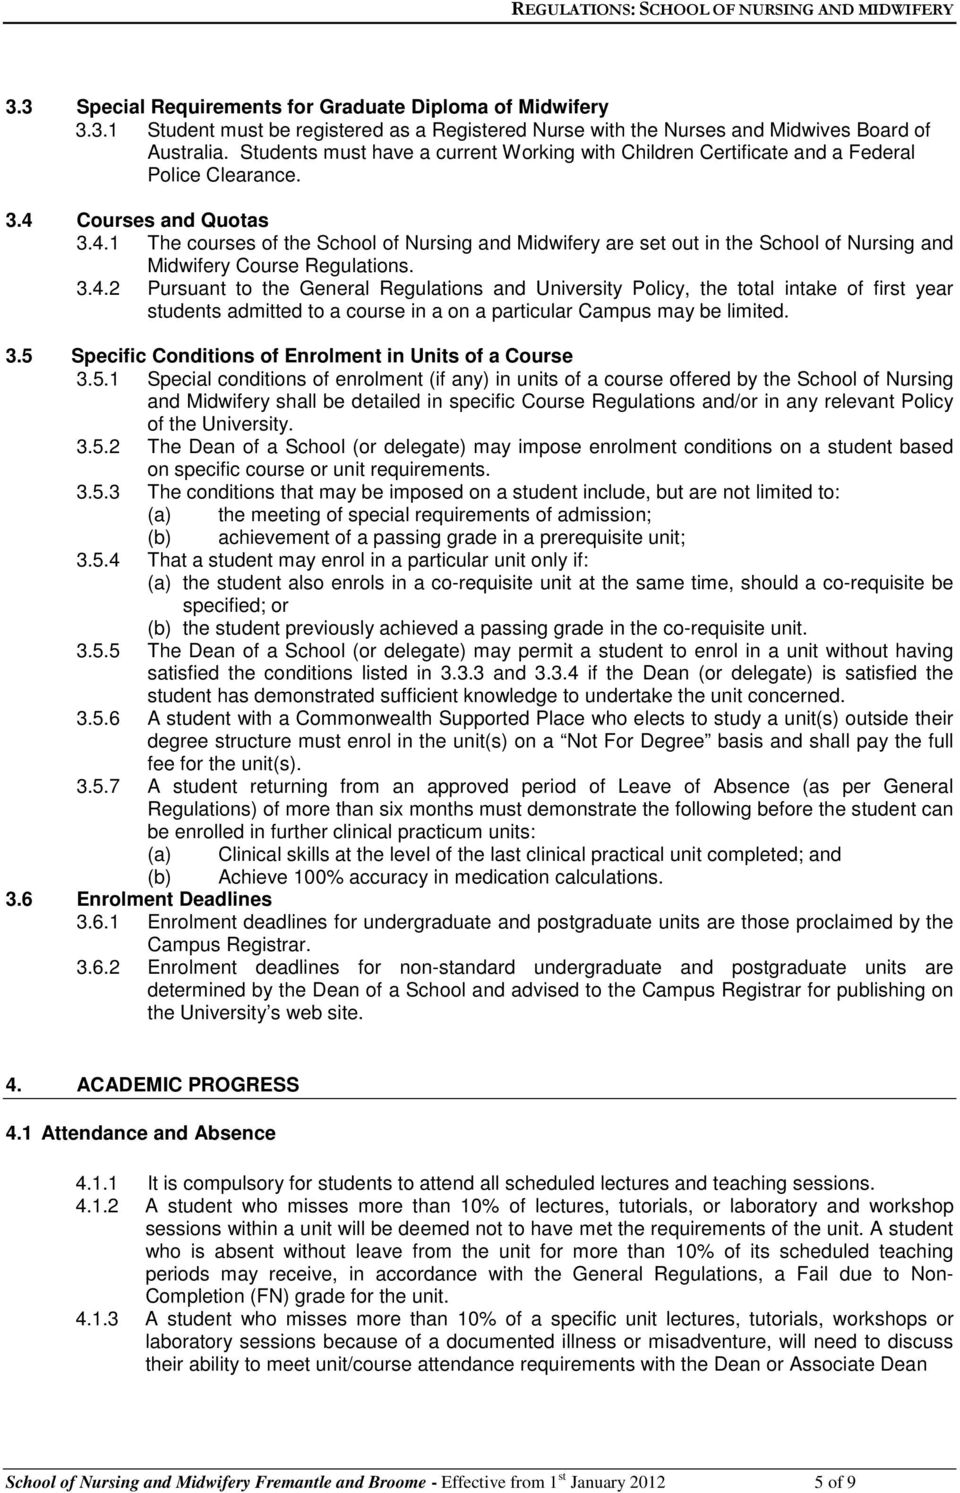 Courses and Quotas 3.4.1 The courses of the School of Nursing and Midwifery are set out in the School of Nursing and Midwifery Course Regulations. 3.4.2 Pursuant to the General Regulations and University Policy, the total intake of first year students admitted to a course in a on a particular Campus may be limited.